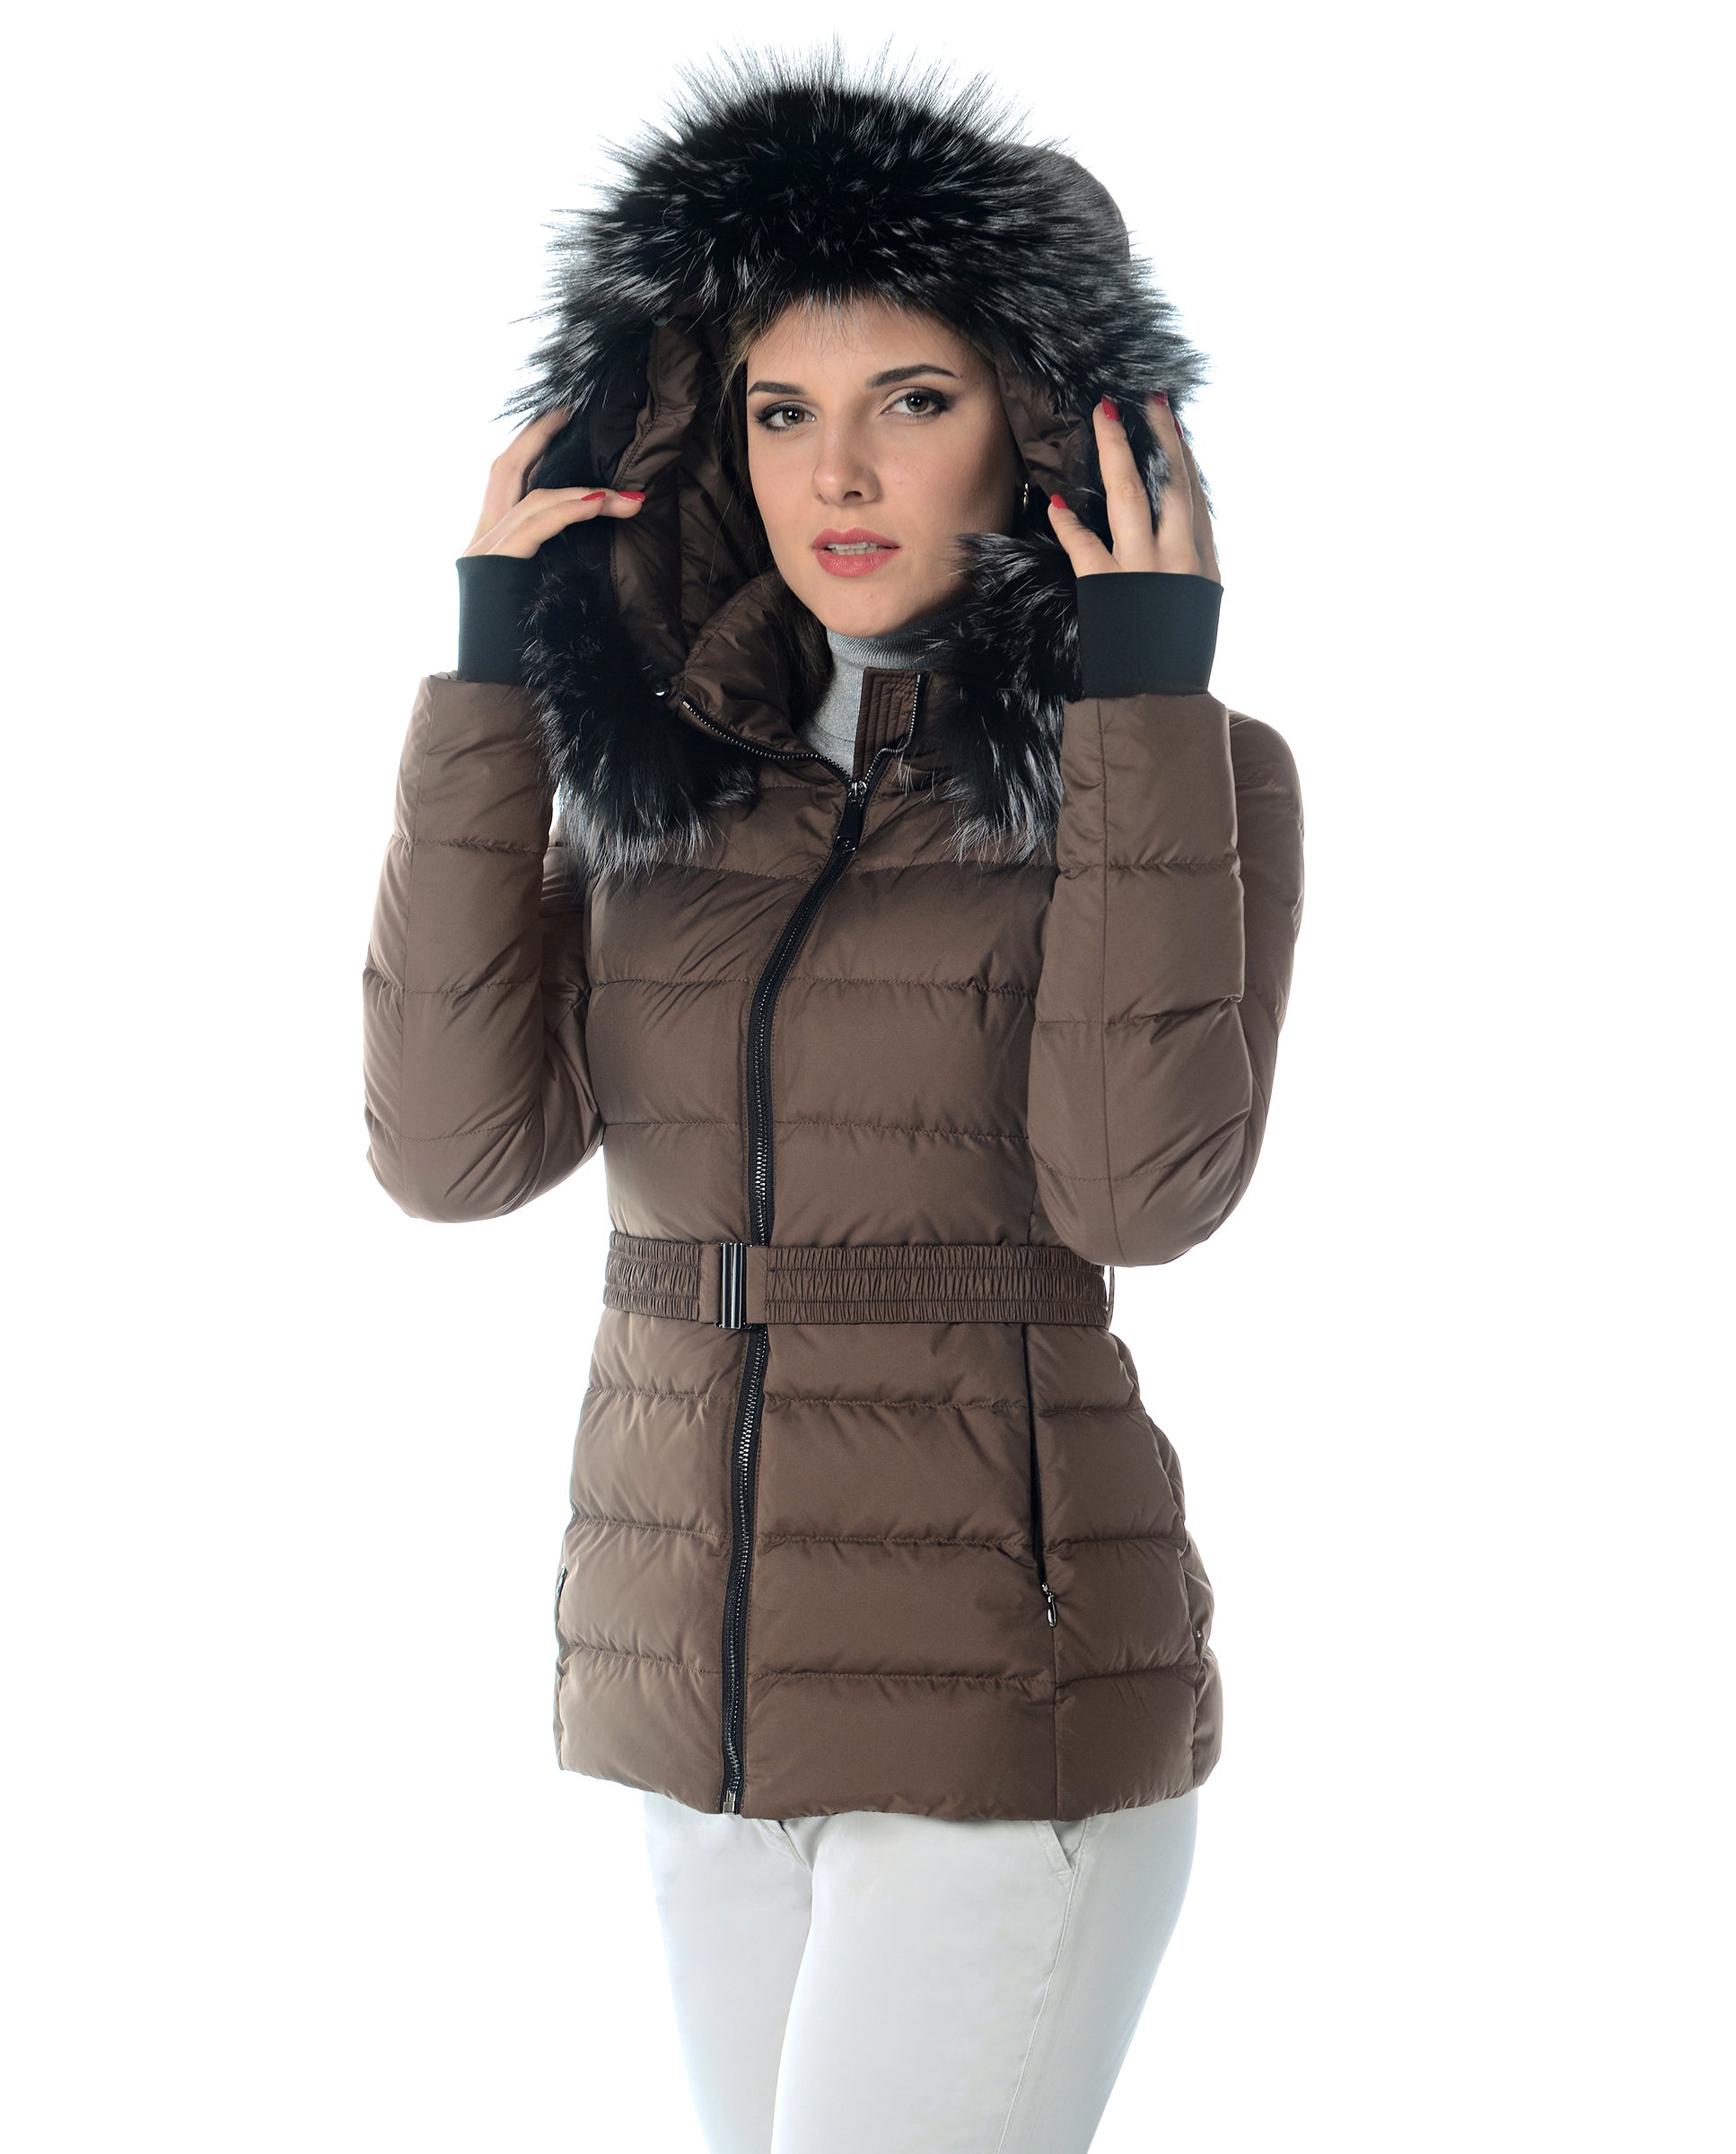 Polyester Jacket With Detachable Fox Trim Hood